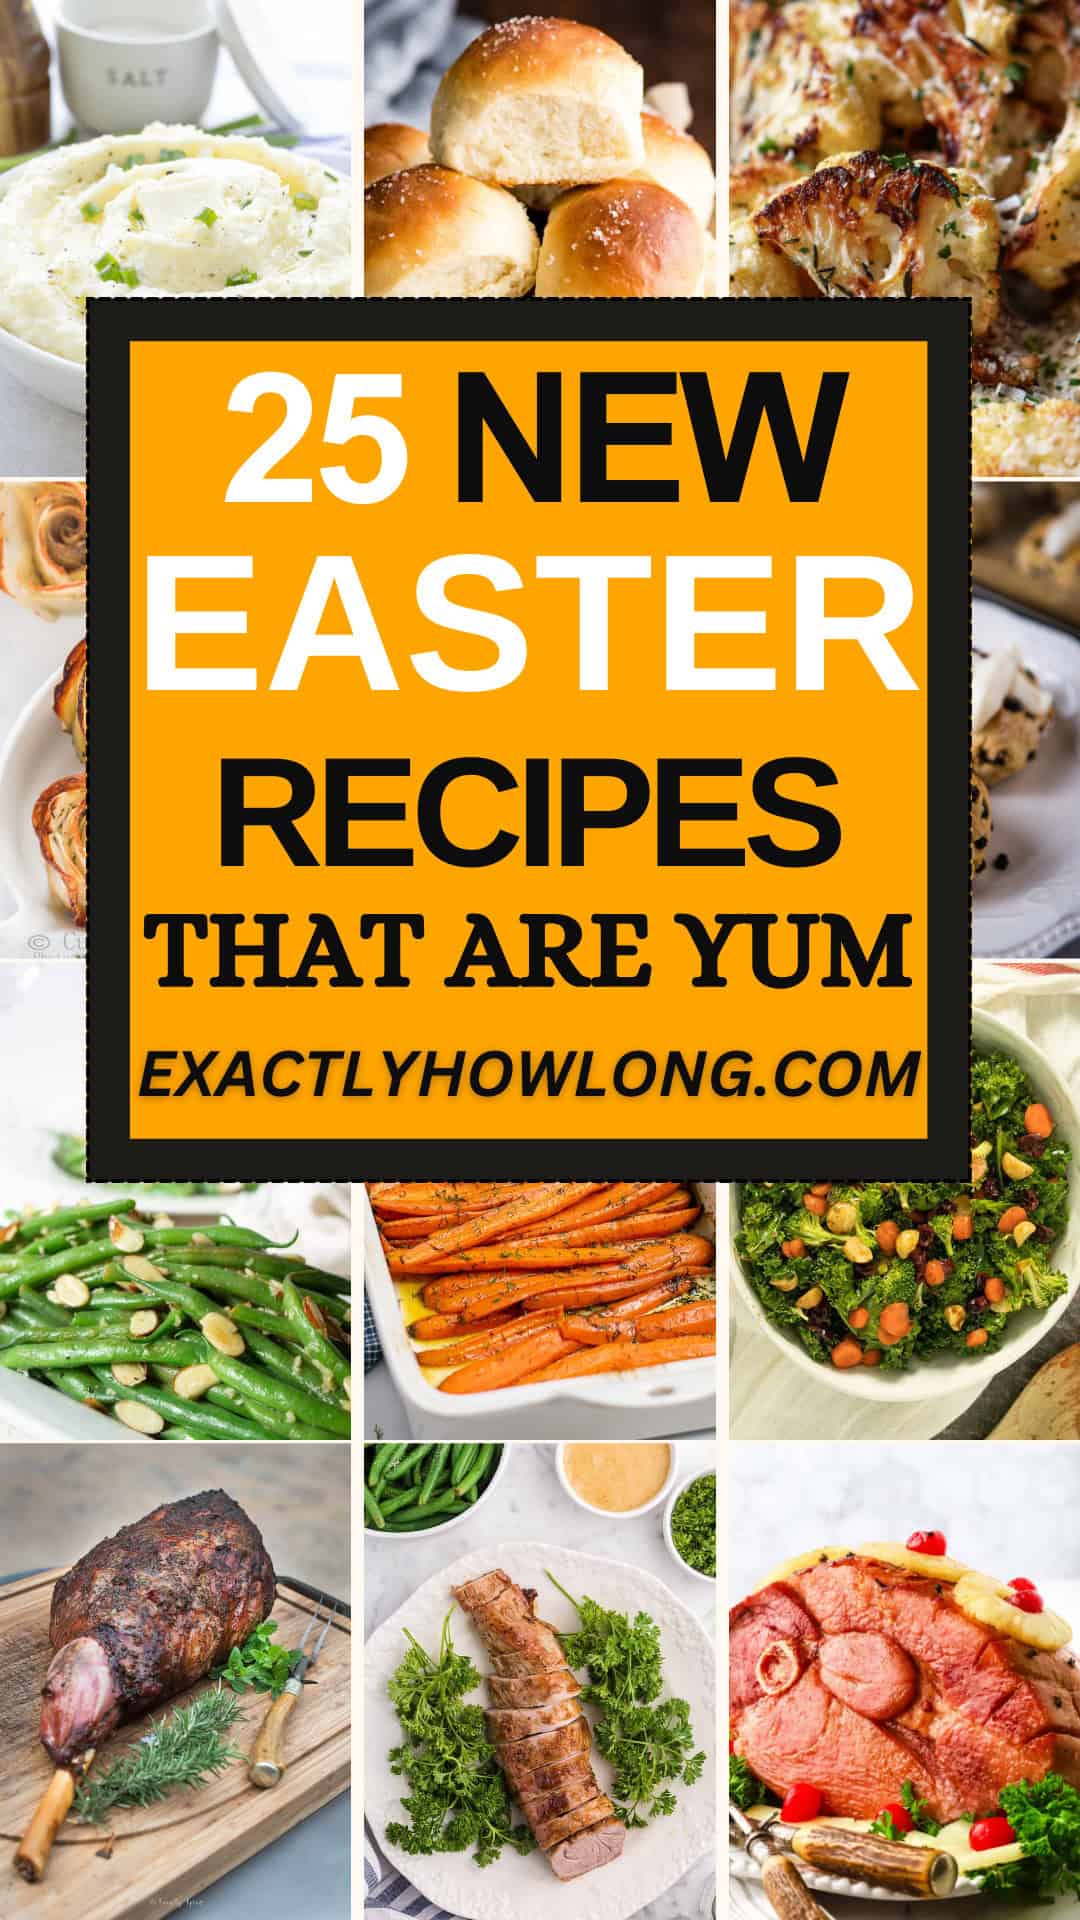 25 New Easter Recipes